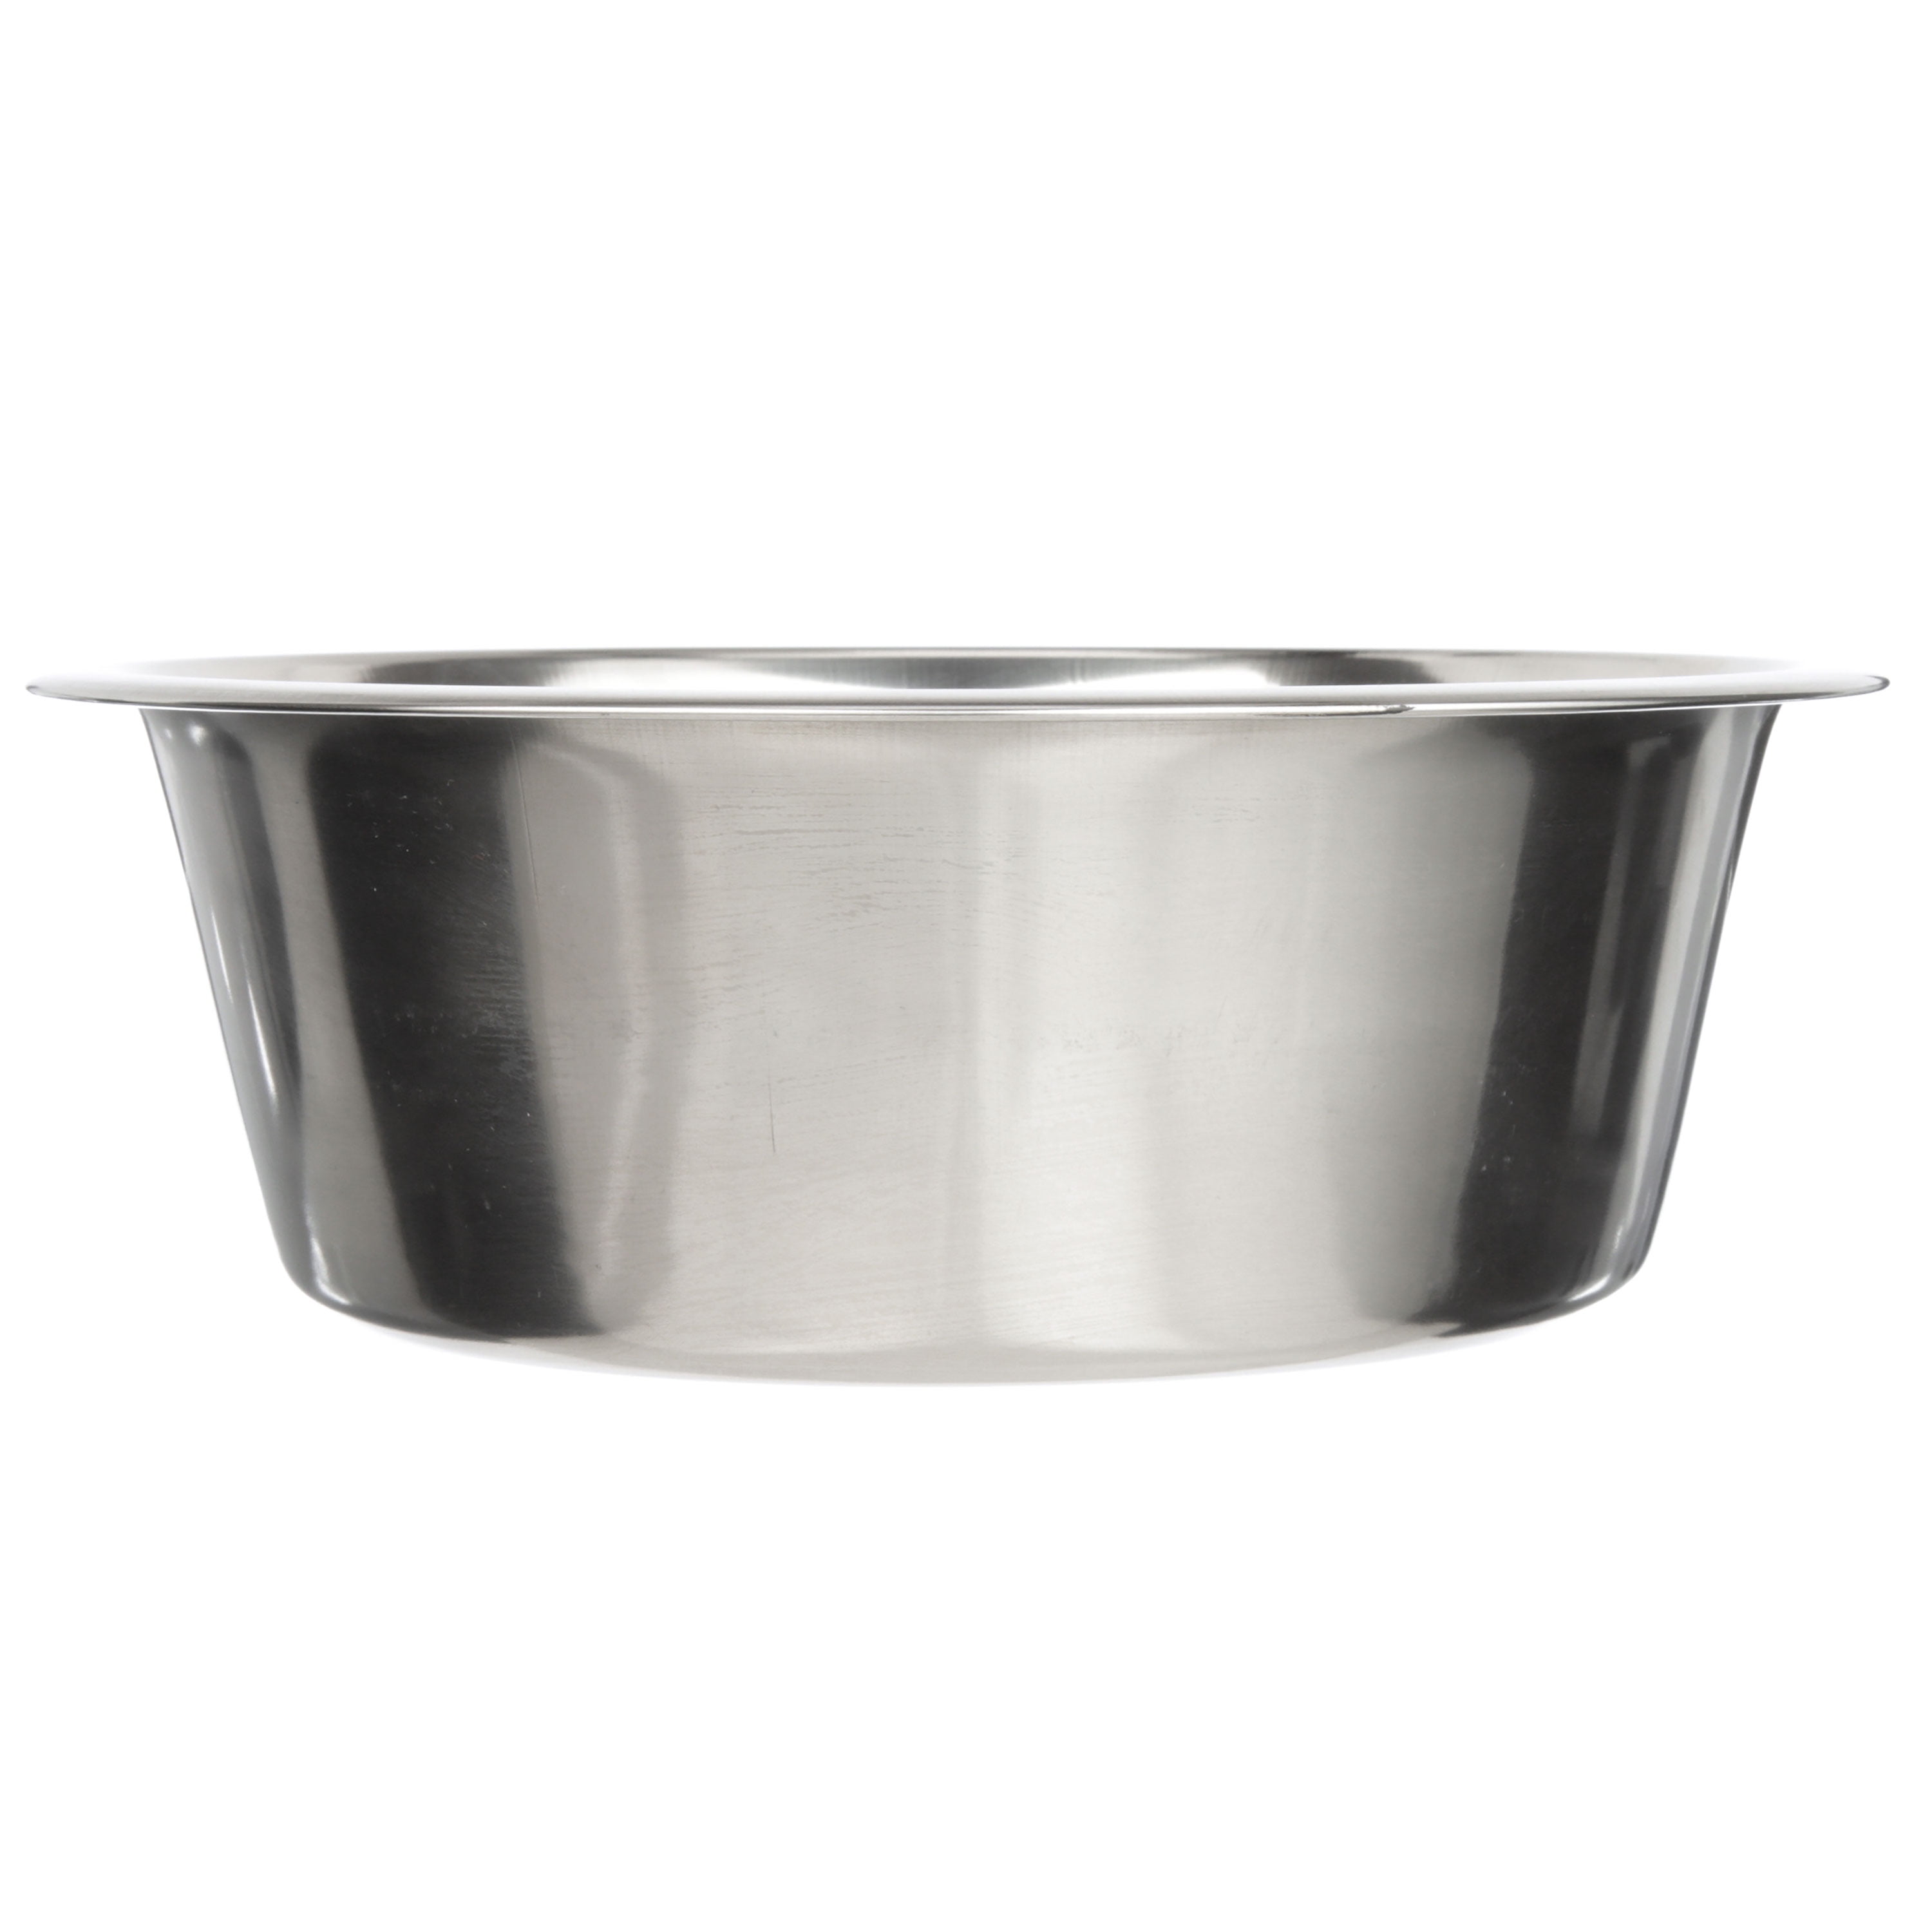 Annchwool Dog Bowls for Large Dogs,2 Pcs Stainless Steel Metal Dog Water  Bowl,Food and Water 1.2 Gallon Large Capacity for Big & X-Large Dogs